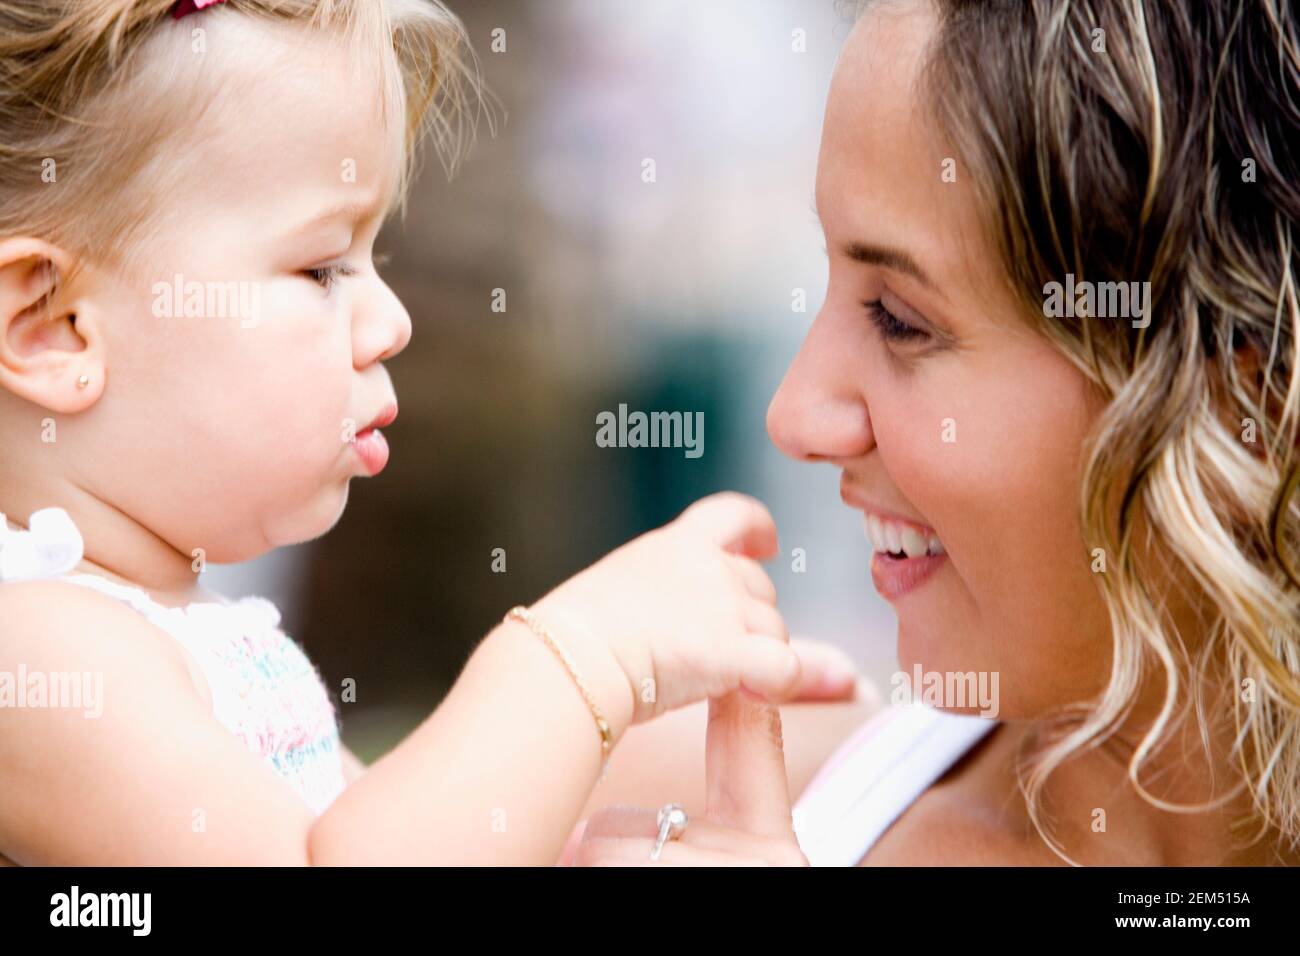 Close-up of a young woman smiling with her daughter Stock Photo